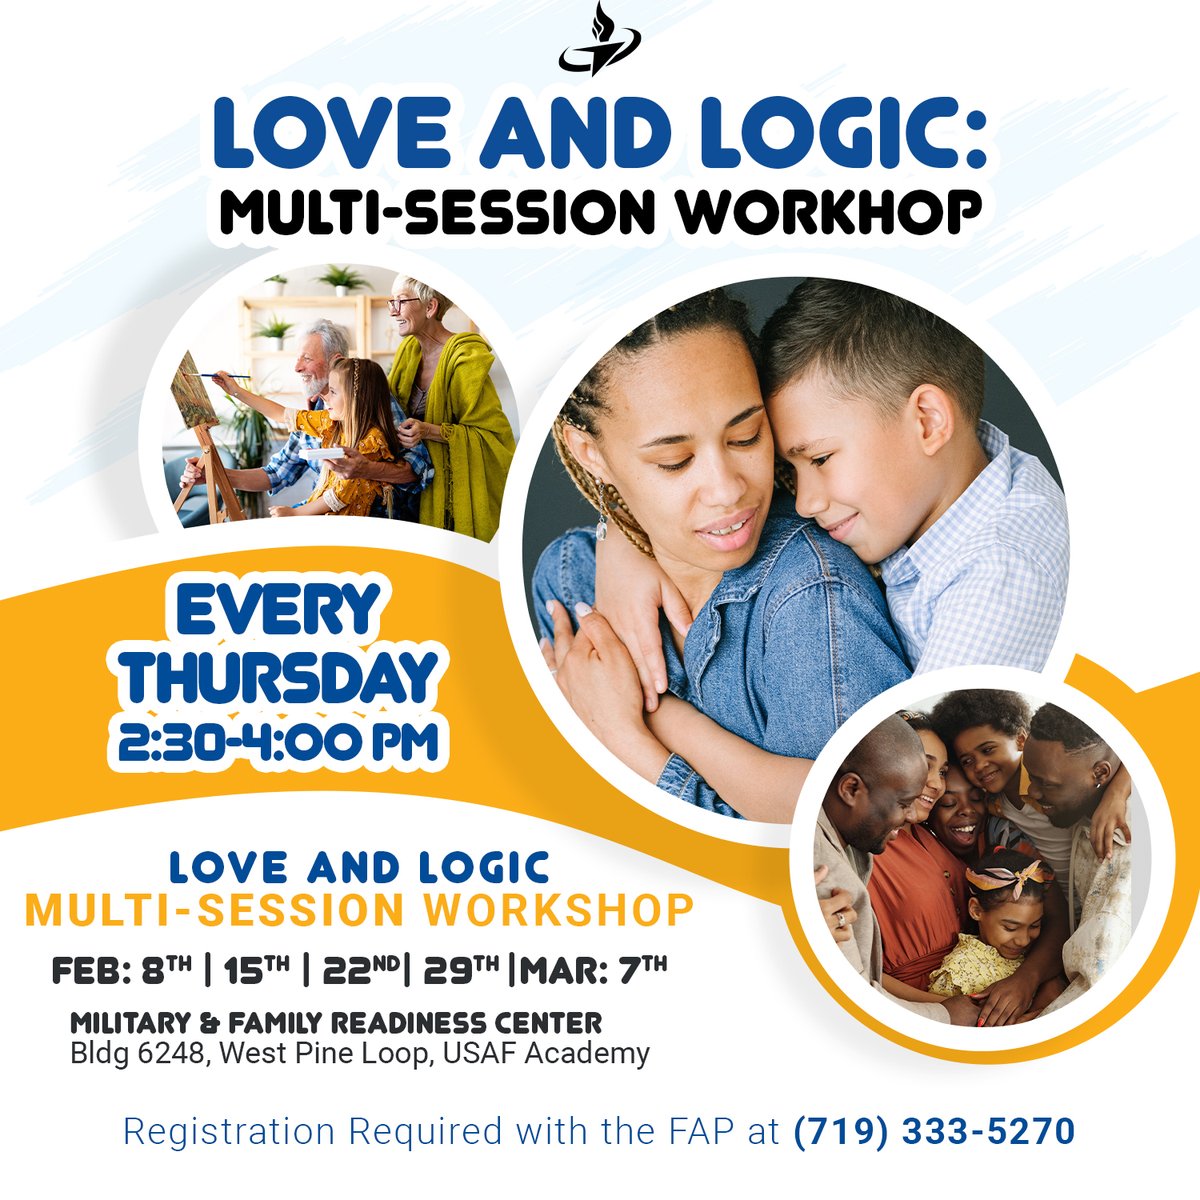 Join us for Love and Logic multI-session workshop at the M&FRC. Registration required.